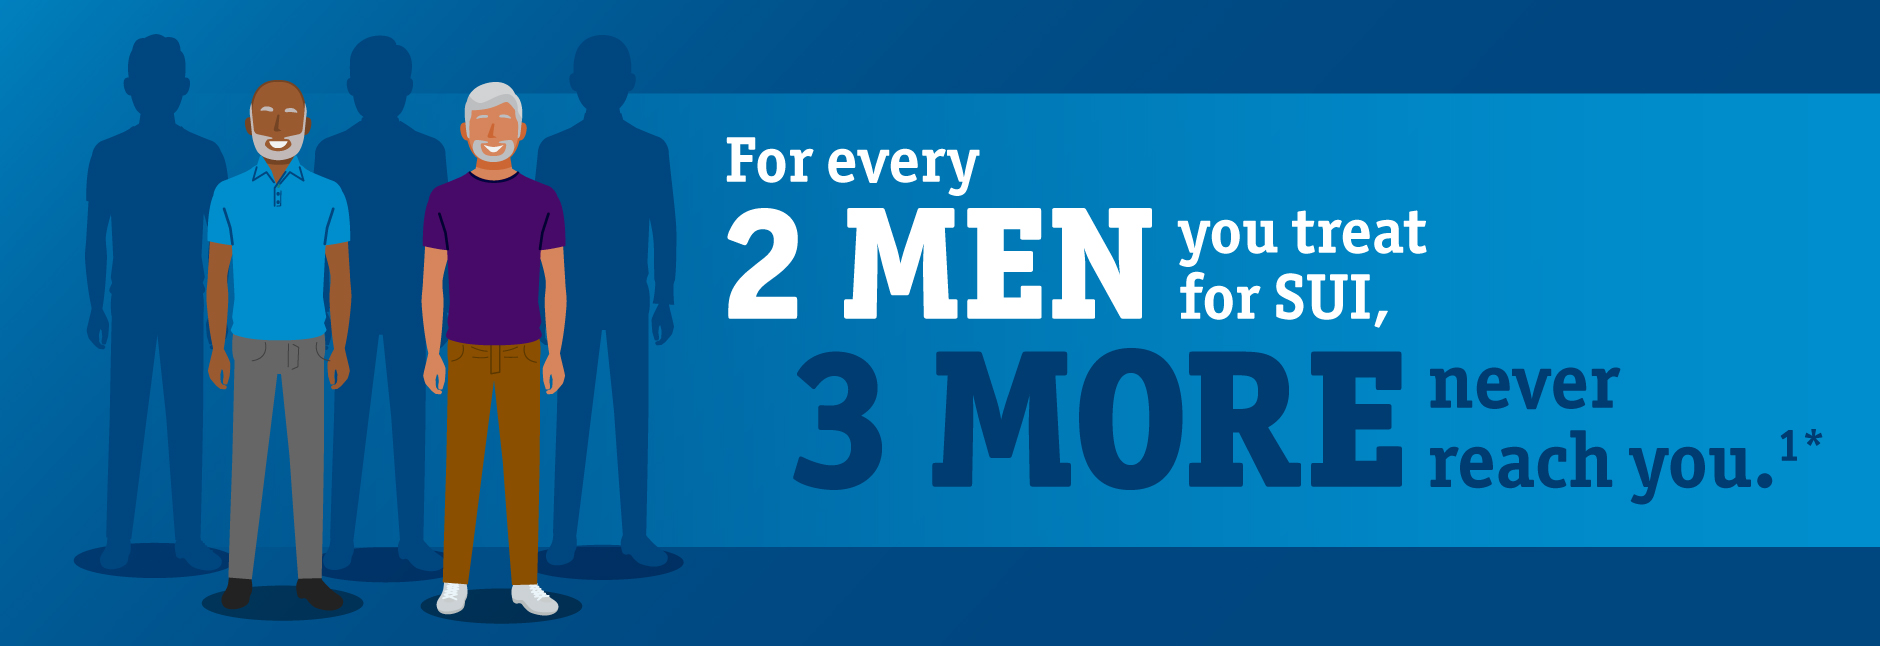 Illustration of 2 men and 3 men silhouettes behind them. For every 2 men you treat for SUI, 3 more never reach you(1).